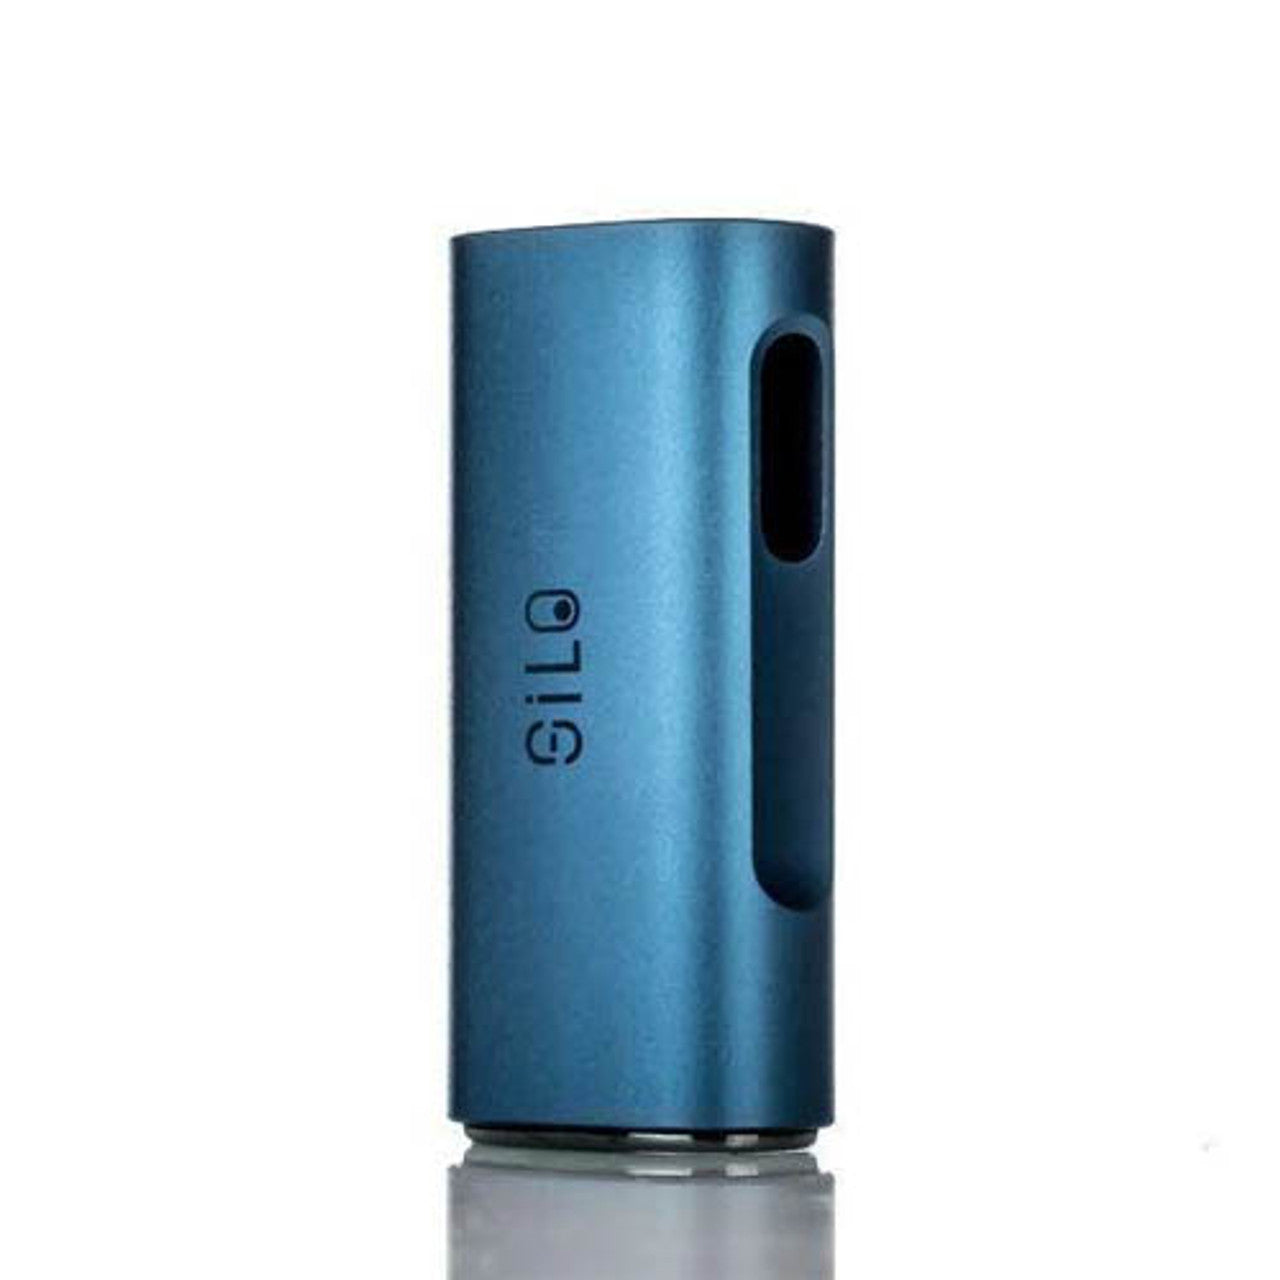 CCELL Silo Battery Kit - Blue